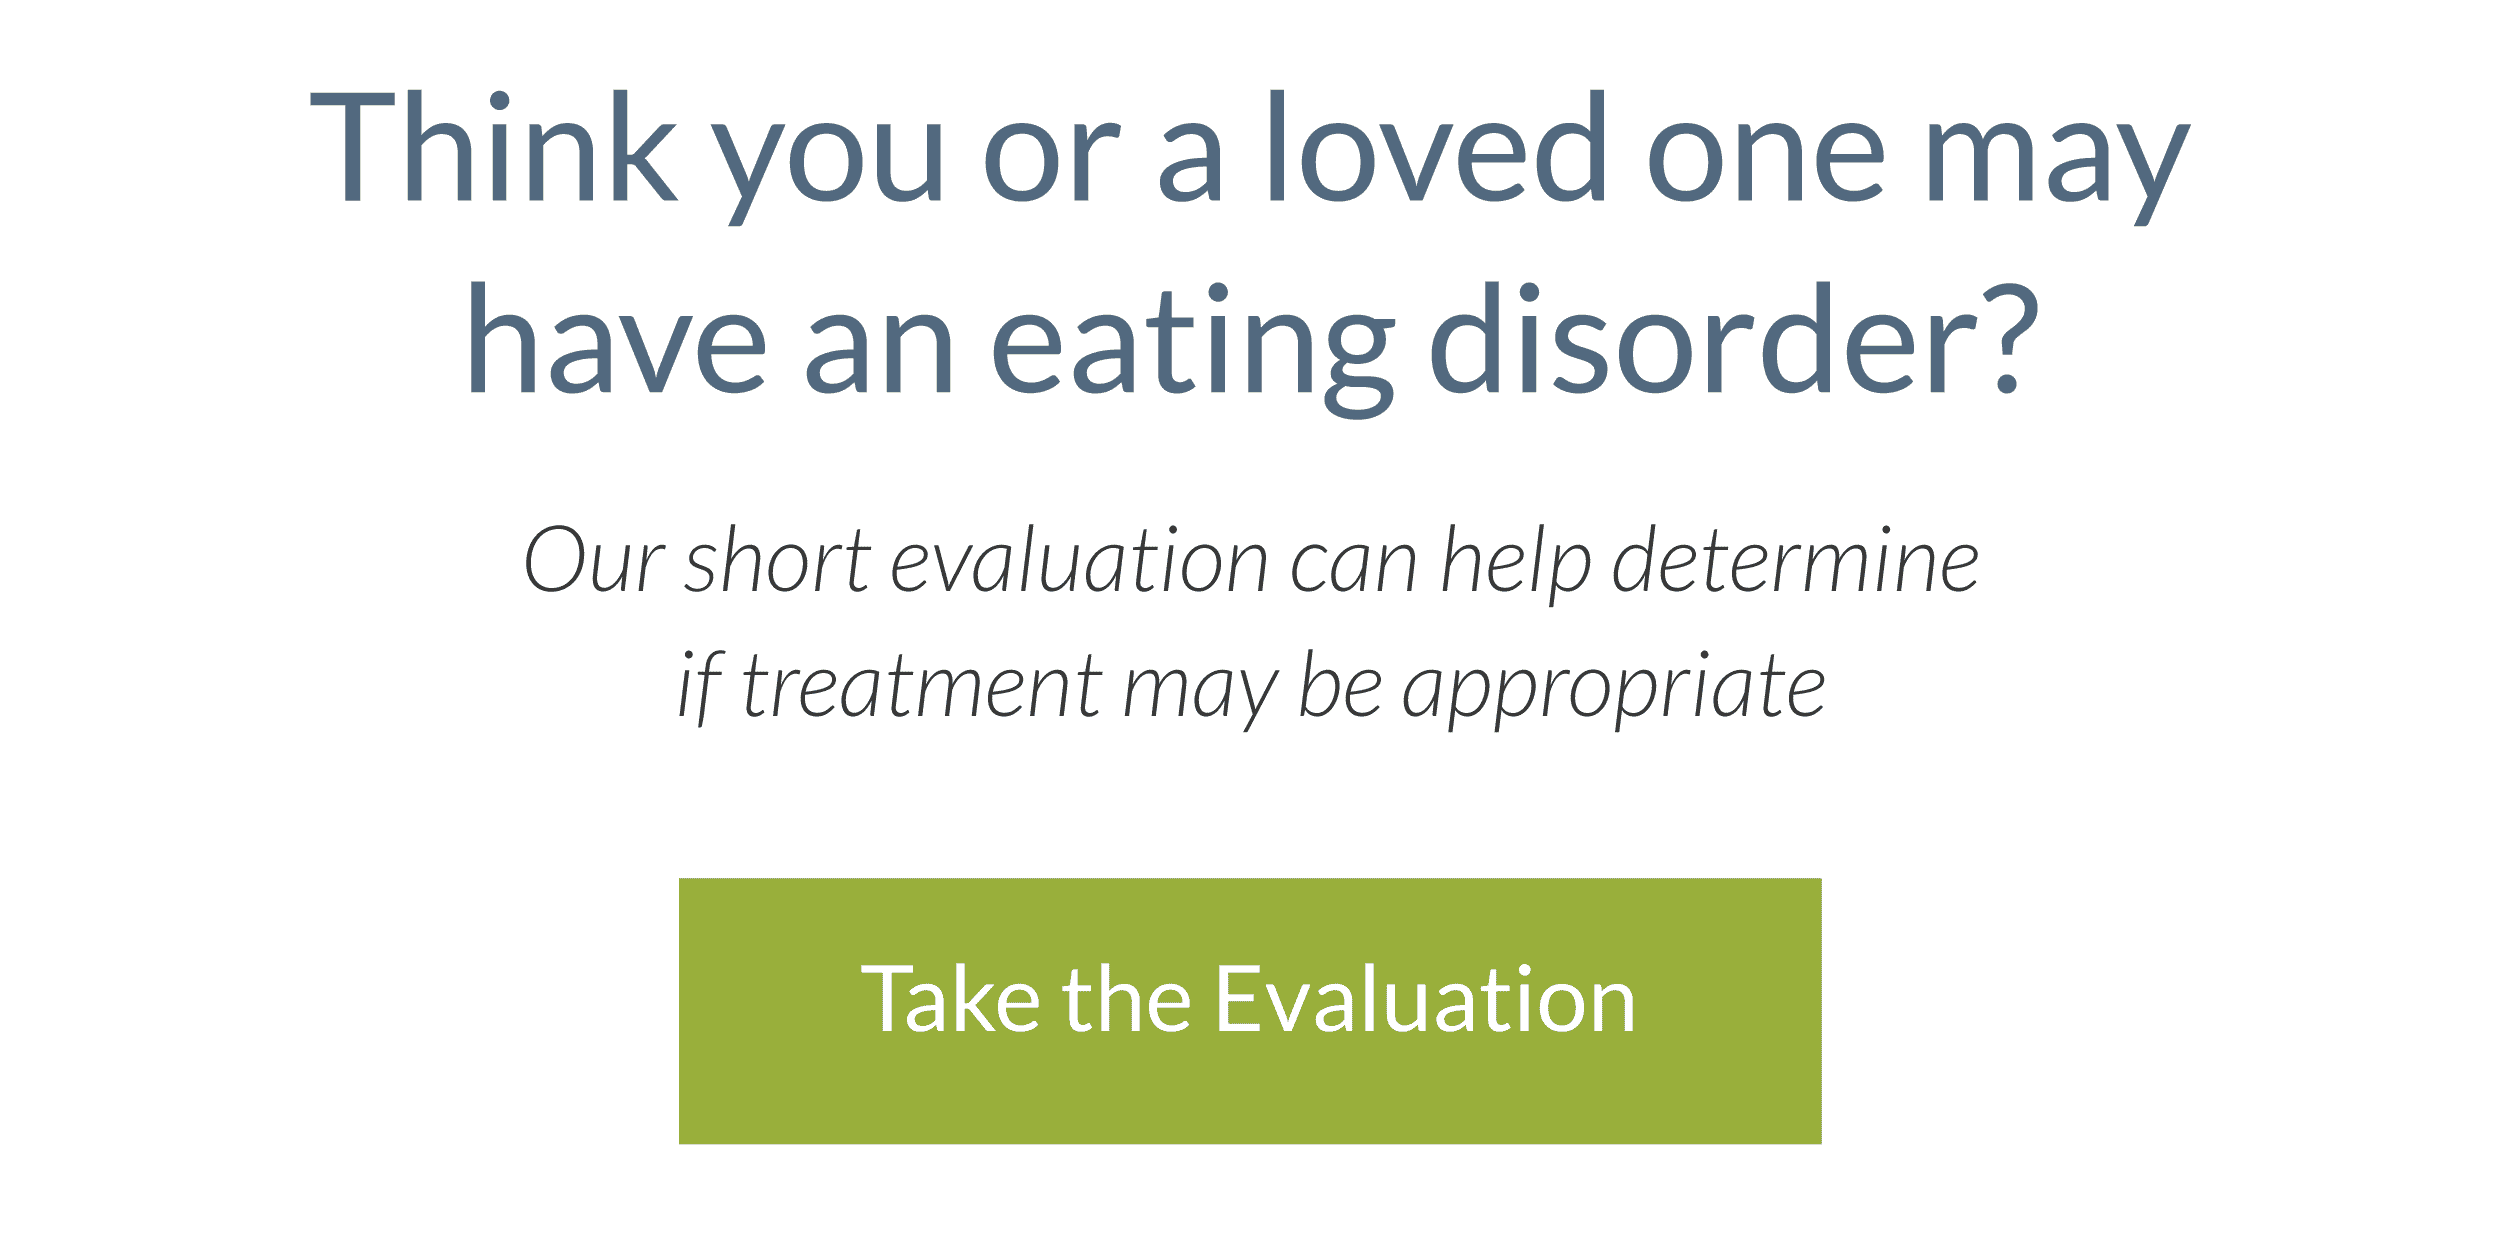 Our eating disorder evaluation can help determine if treatment may be appropriate